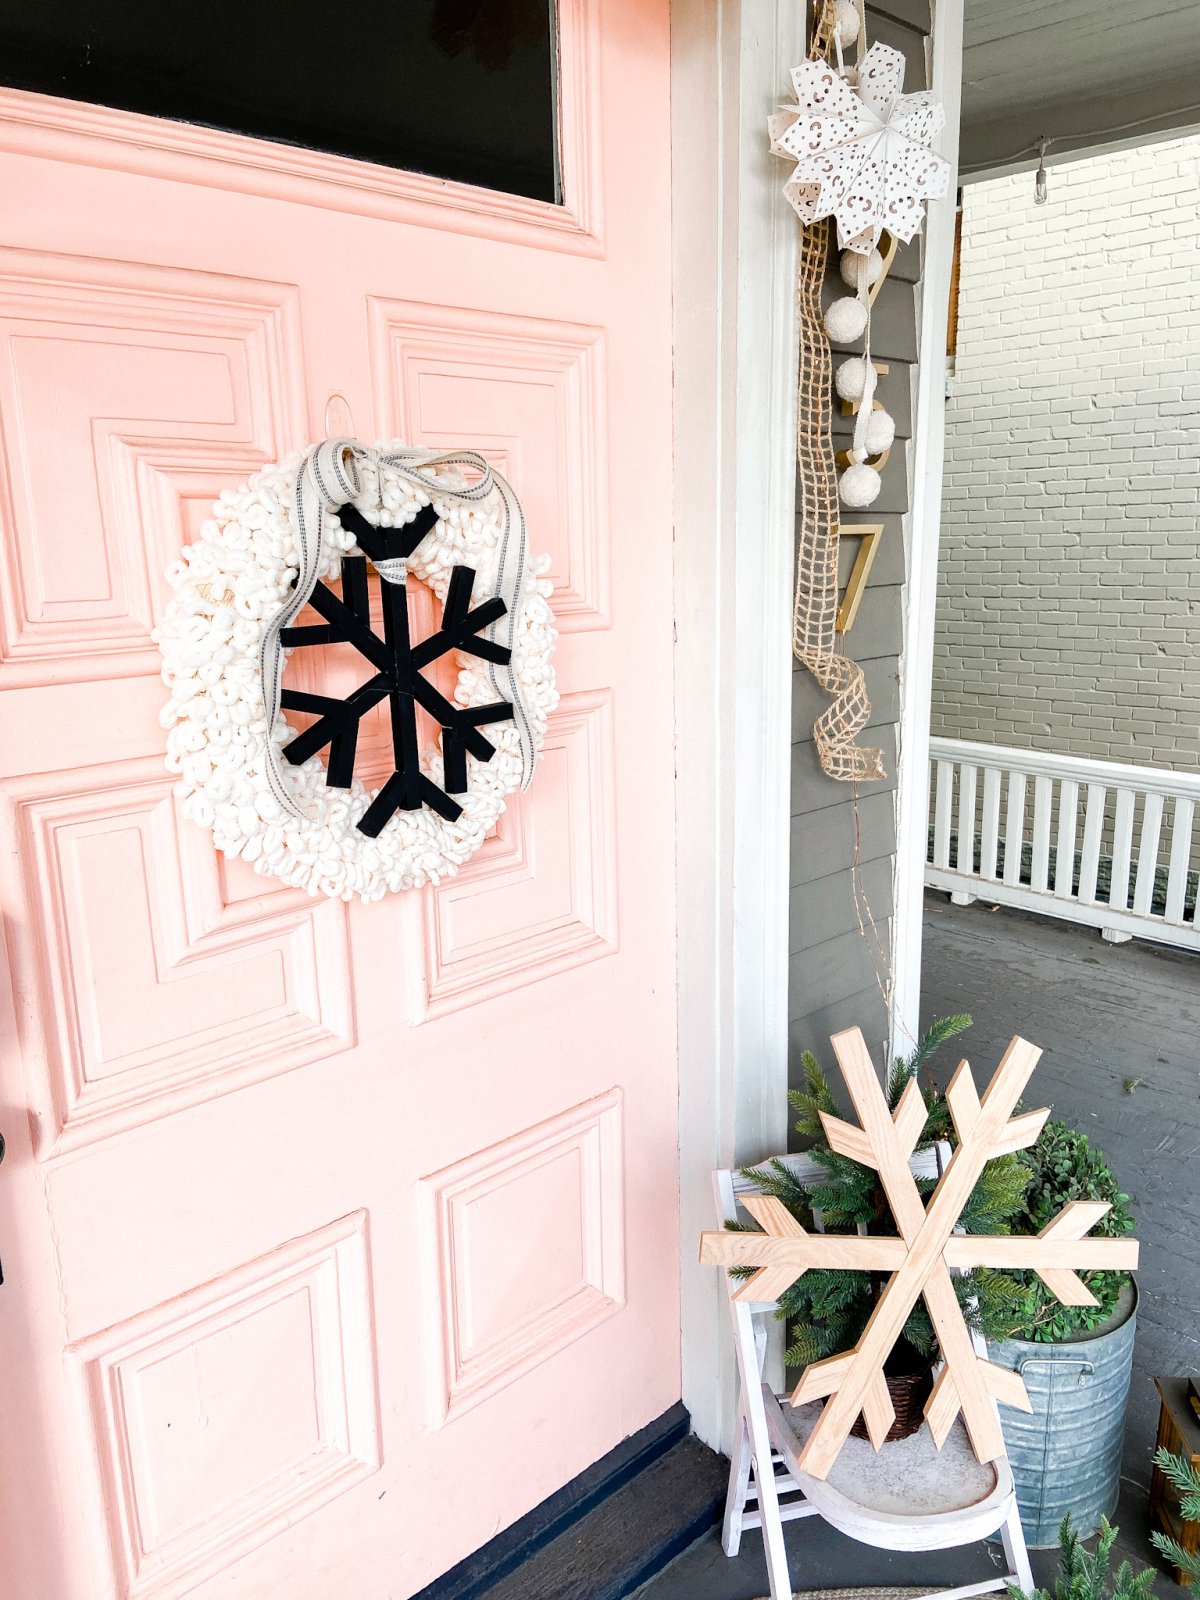 How to make a snowflake porch